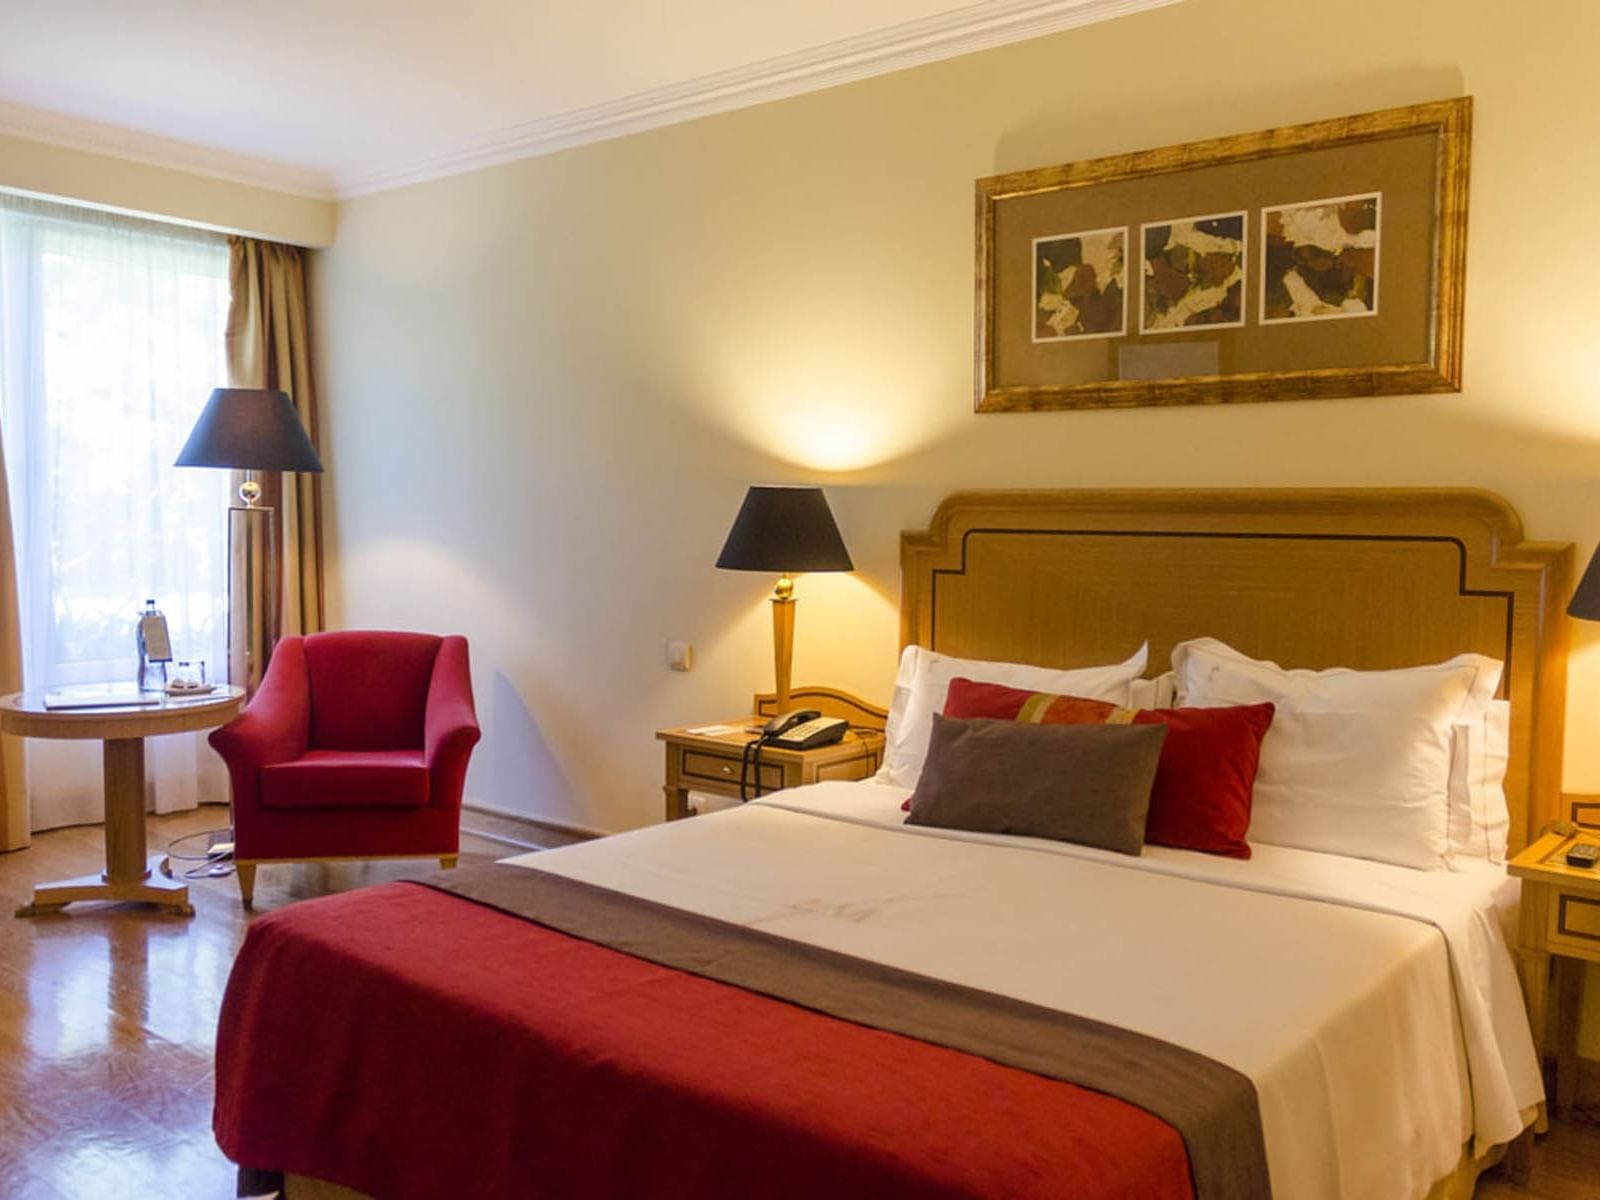 Standard Room with a single comfy  bed at Hotel Cascais Miragem